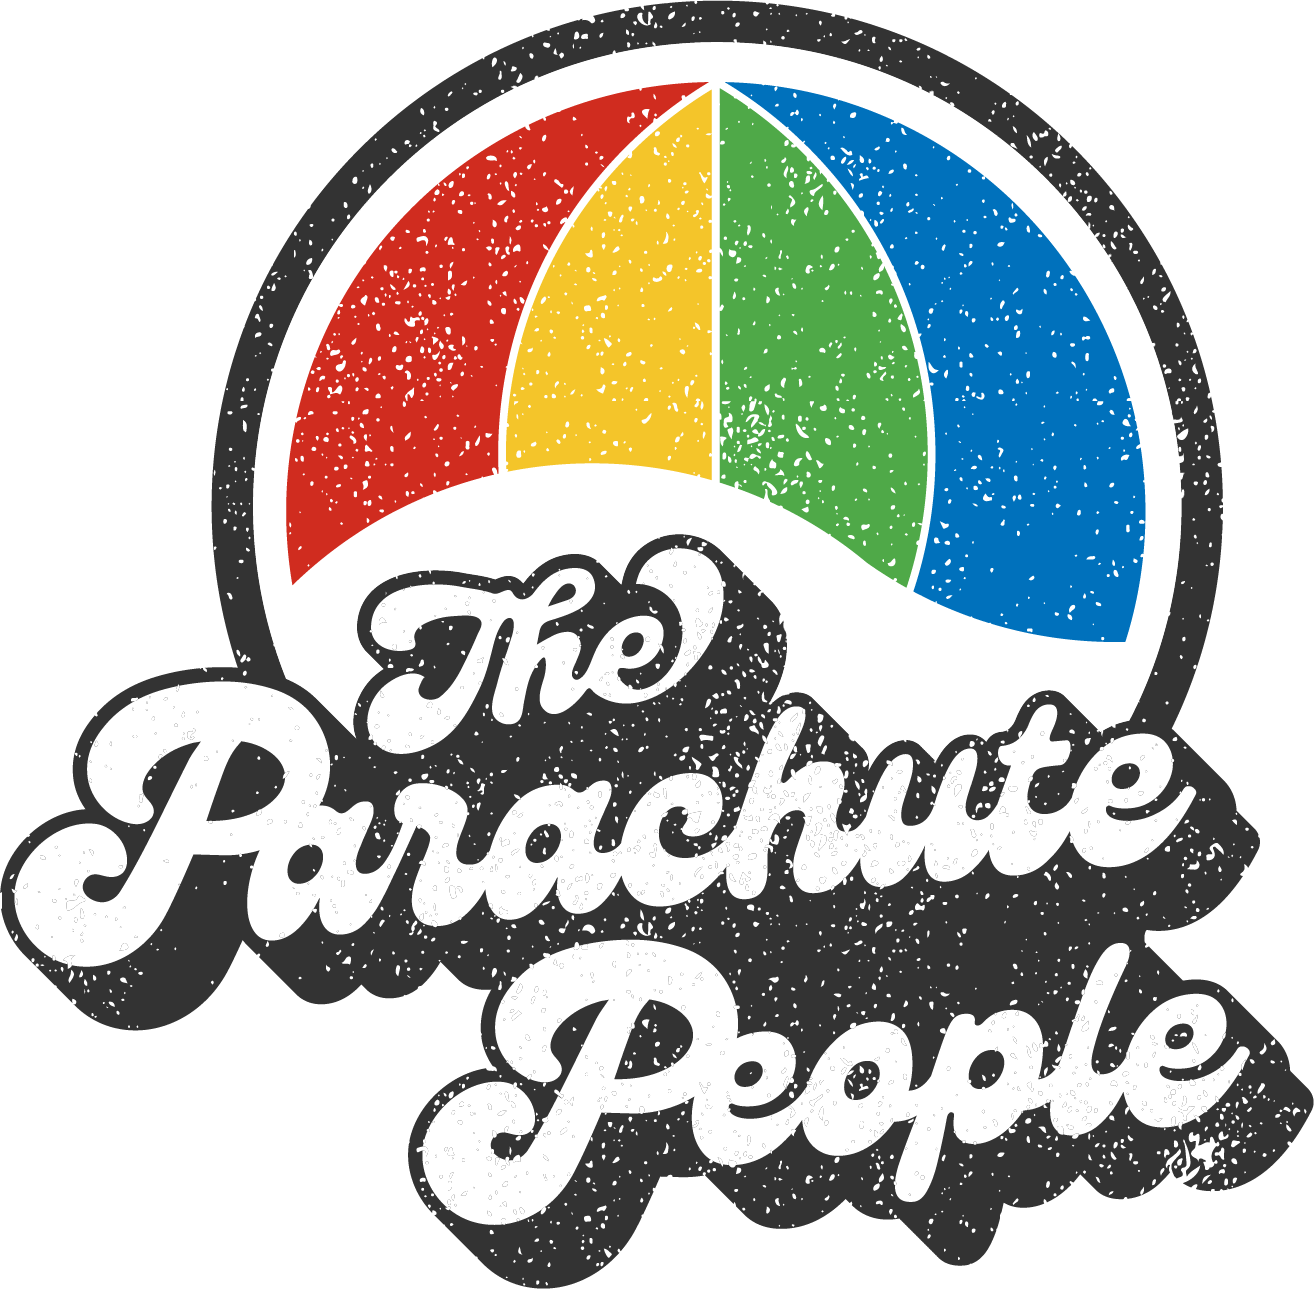 The Parachute People